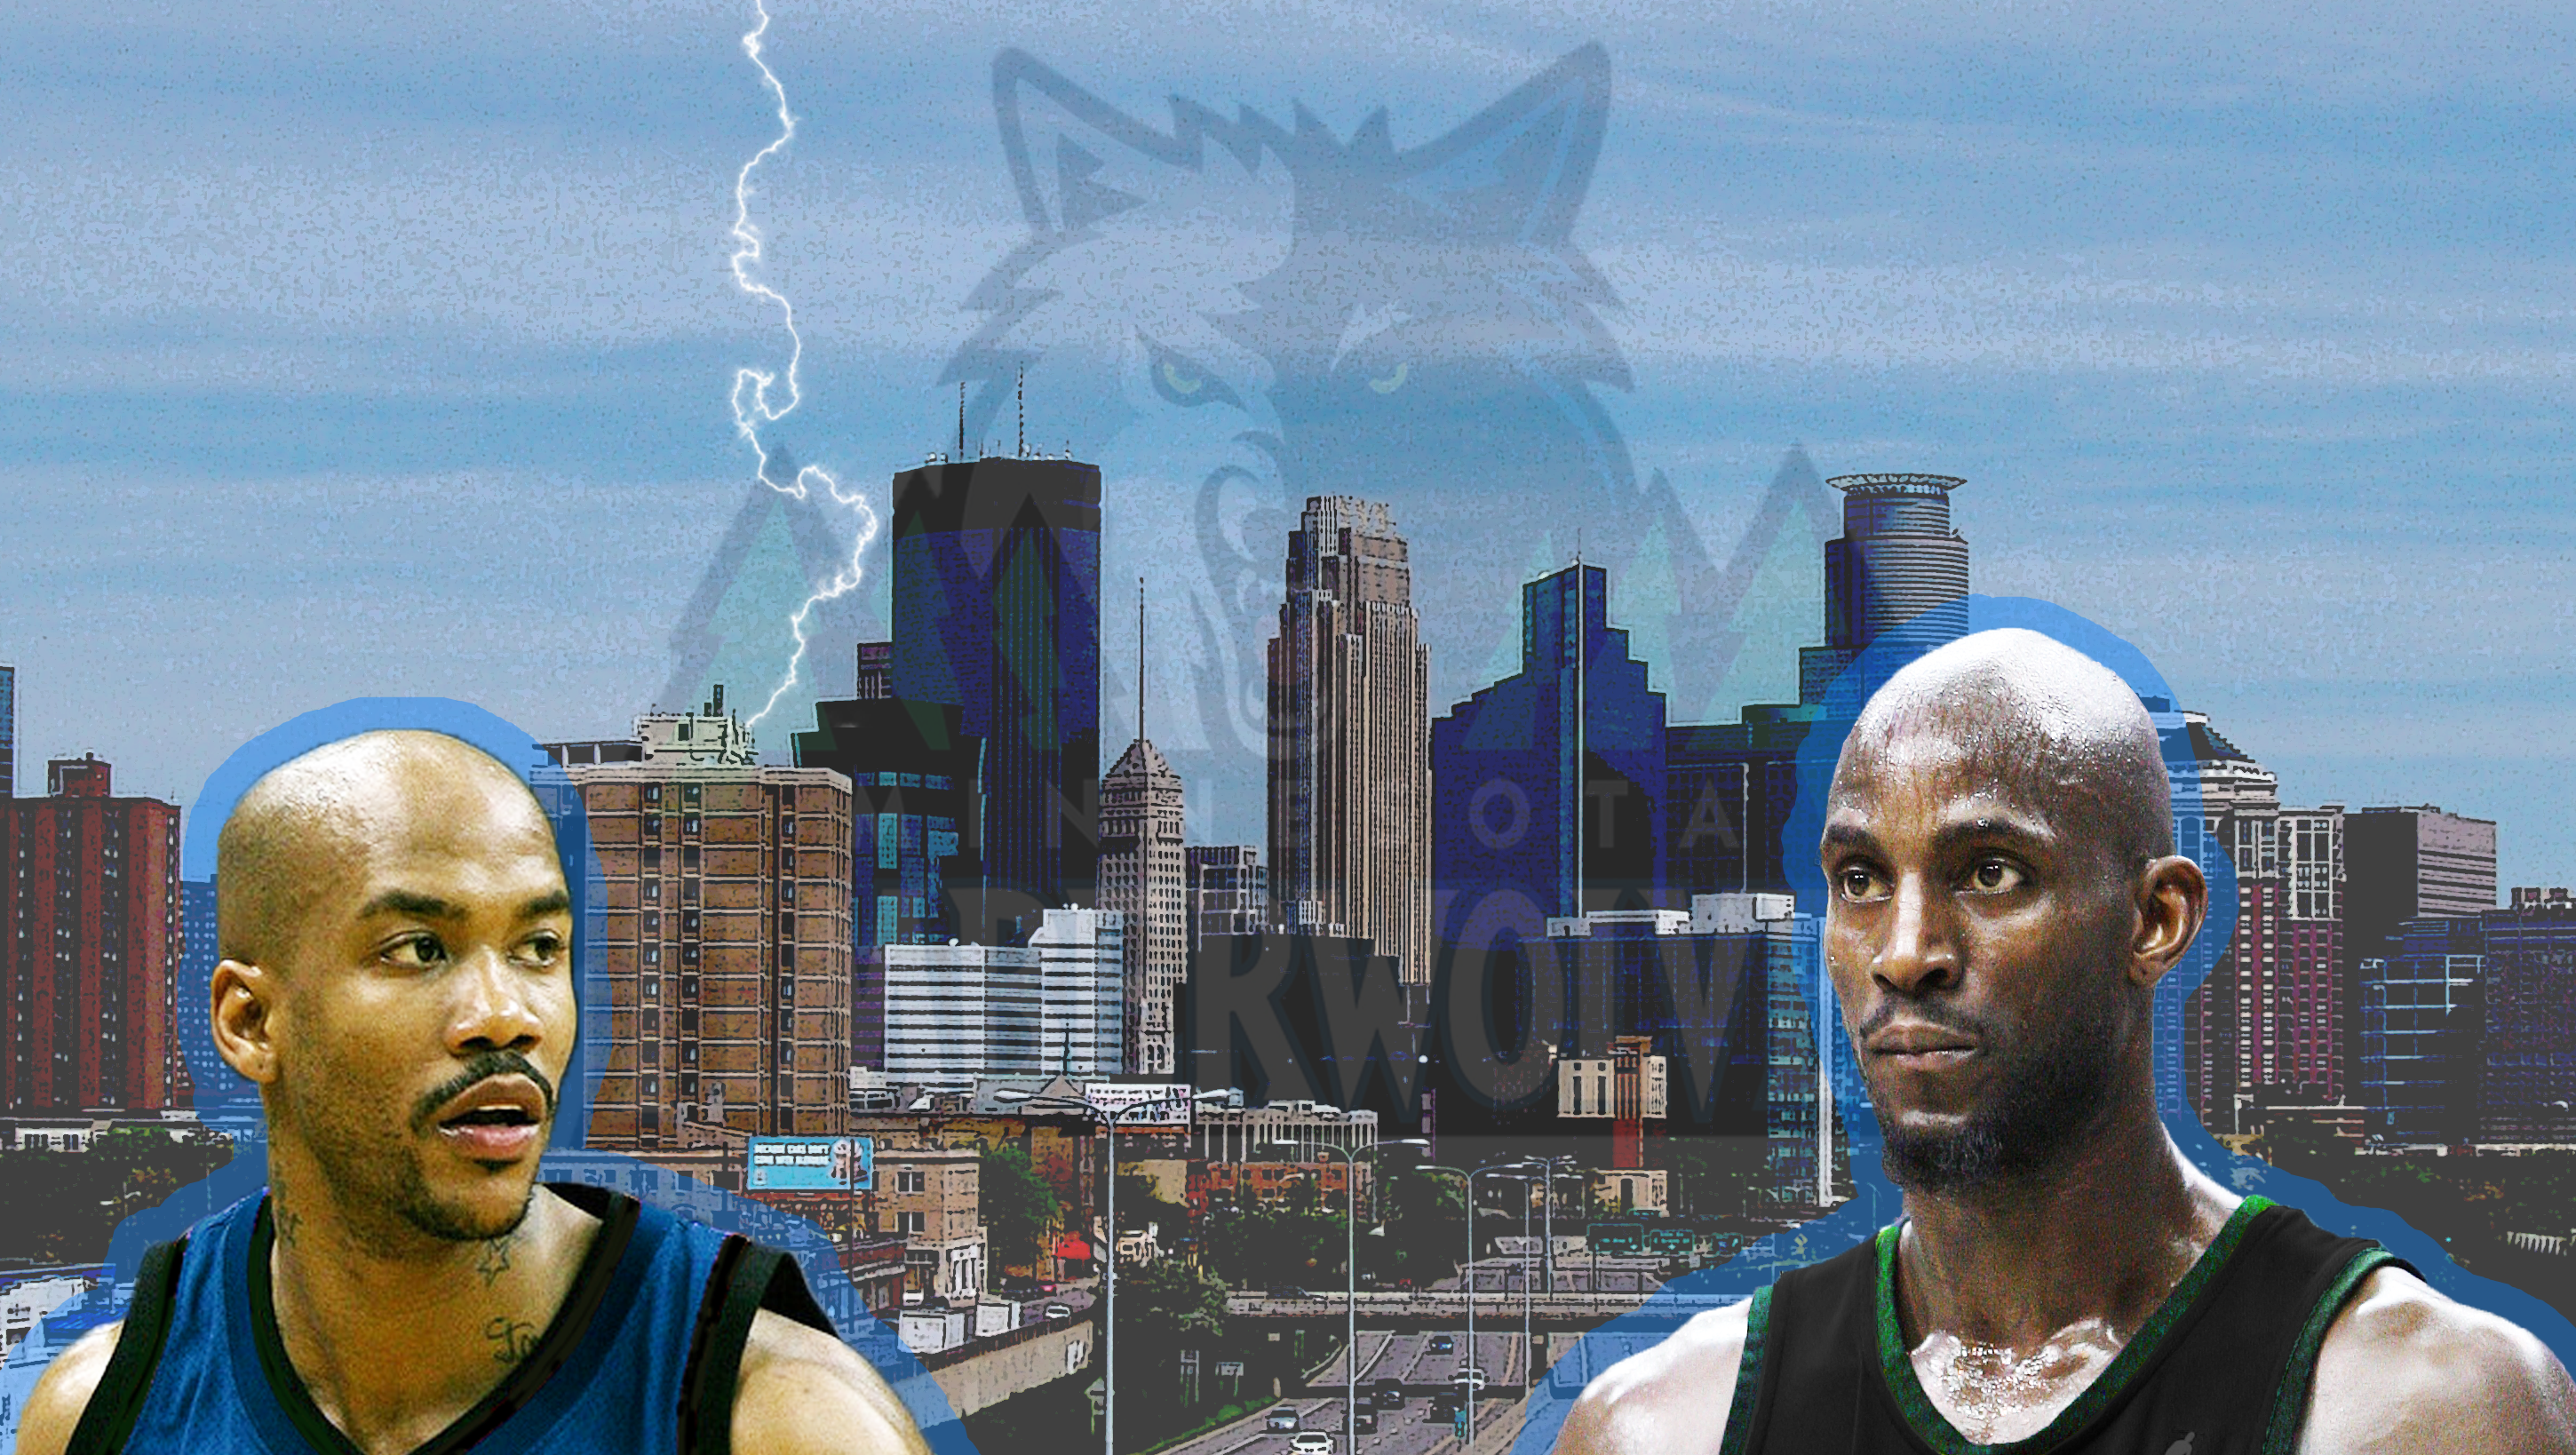 Timberwolves' new uniforms honor Minneapolis and St. Paul - Bring Me The  News